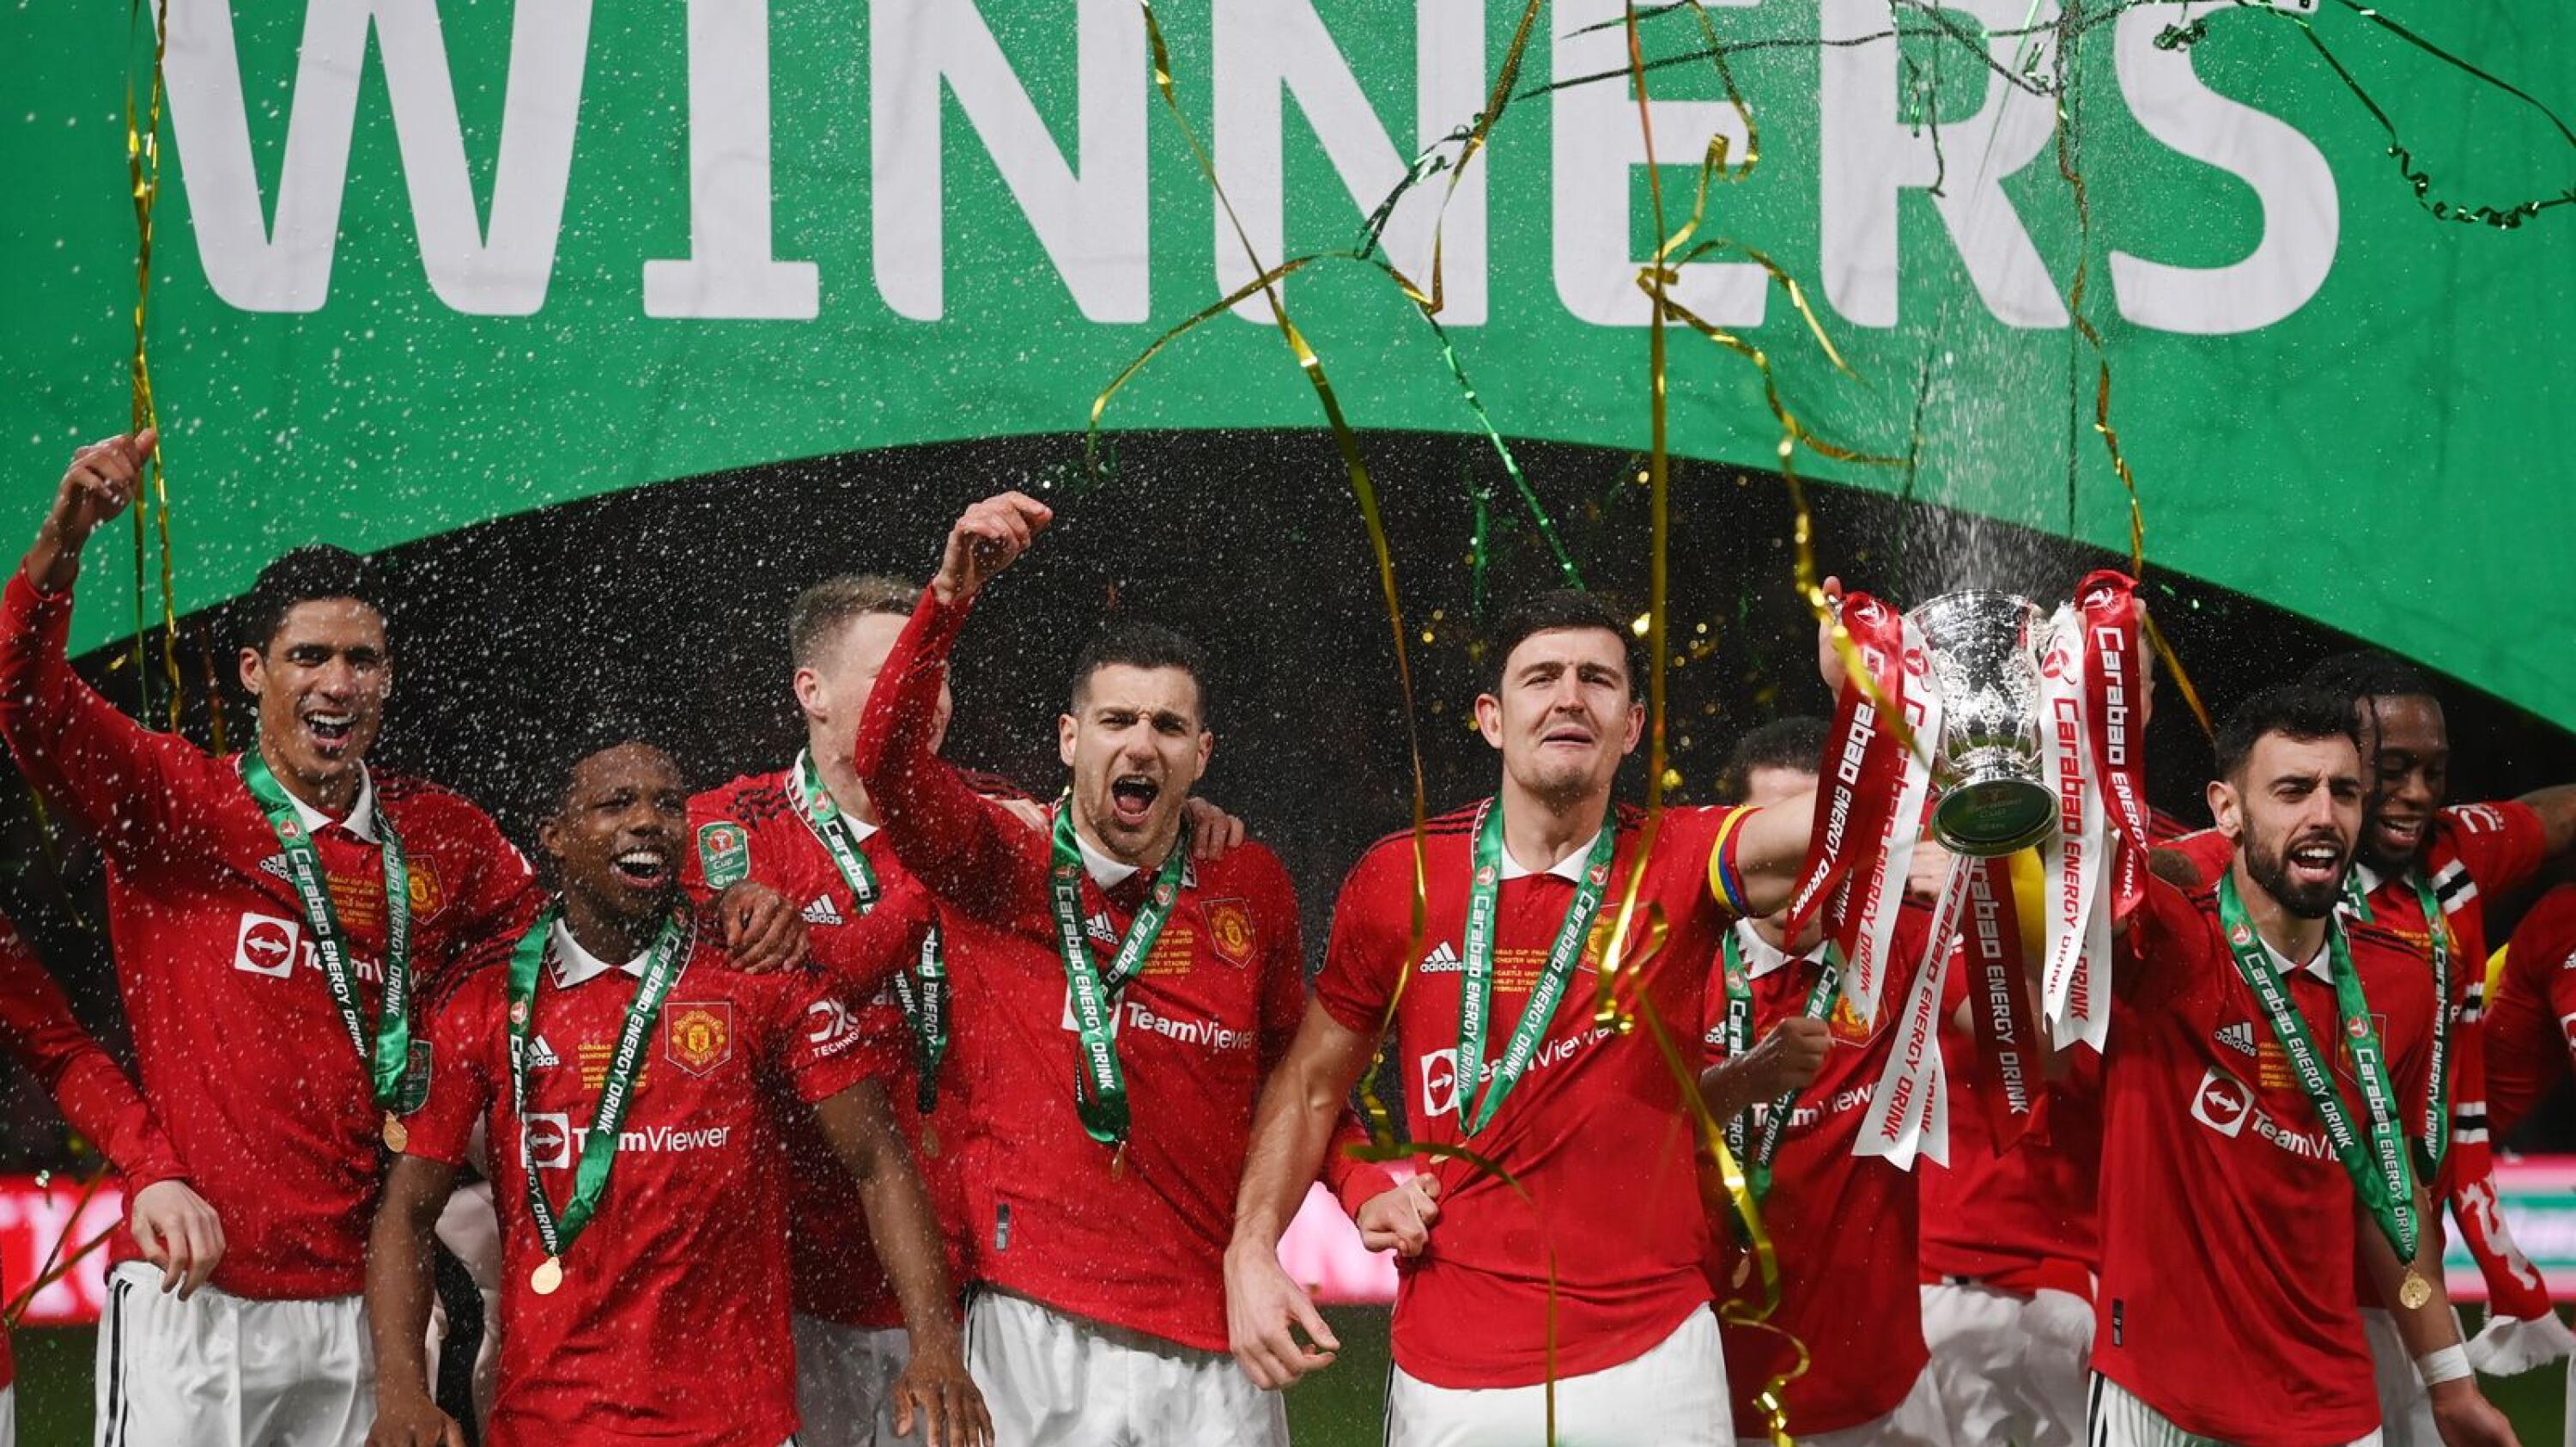 Manchester United celebrate after winning the Carabao Cup final against Newcastle United on Sunday